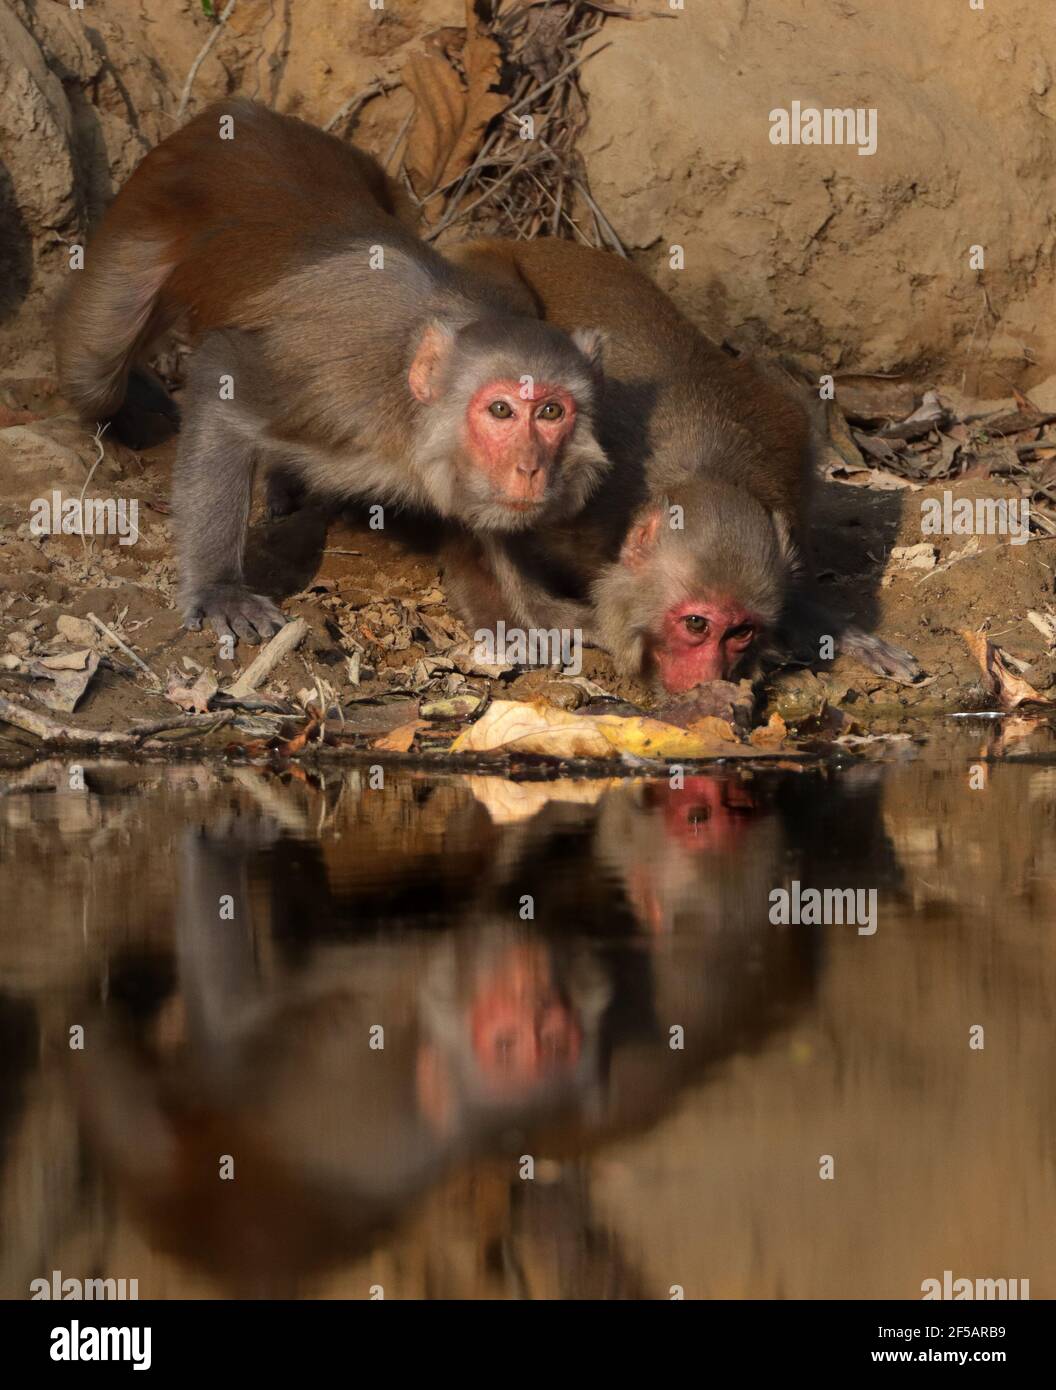 Two adult rhesus monkey drinking water from a pond Stock Photo